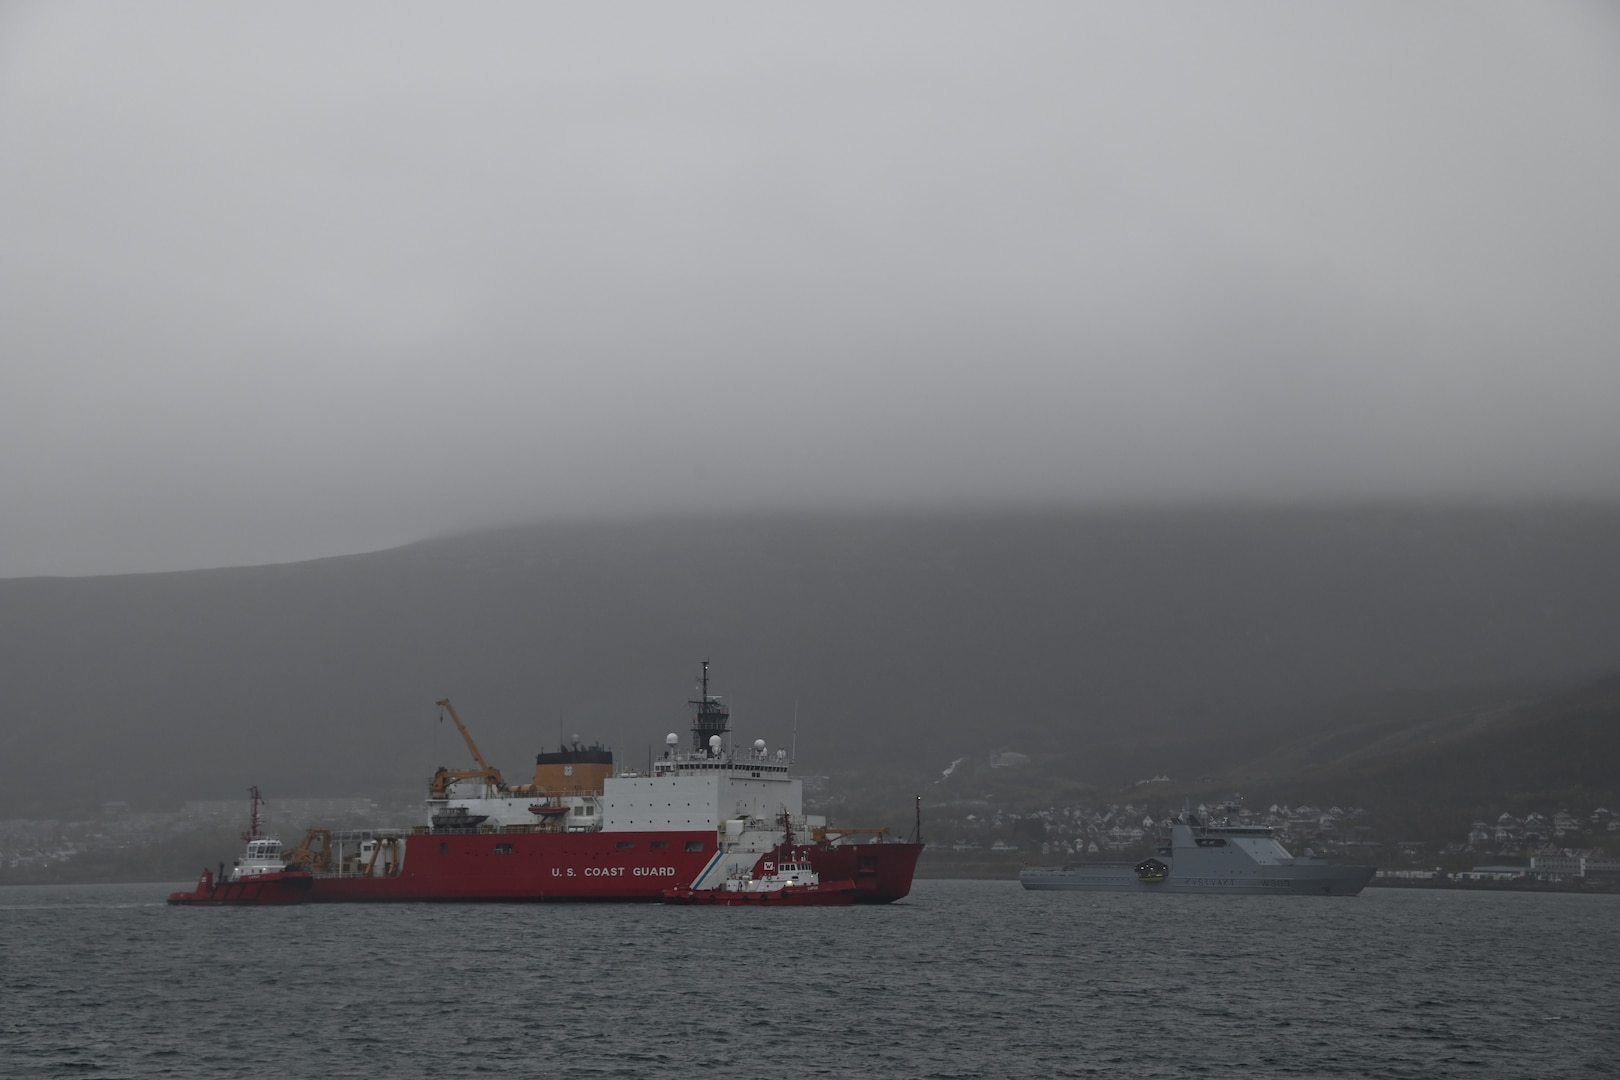 The U.S. Coast Guard Cutter Healy (WAGB 20) transits the Tromsøysundet Strait alongside the Norwegian Coast Guard Vessel Svalbard near Tromsø, Norway, Oct. 1, 2023. The U.S. shares a decades-long stalwart partnership with Norway built upon shared values, experiences, and vision. (U.S. Coast Guard photo by Senior Chief Petty Officer Charly Tautfest)